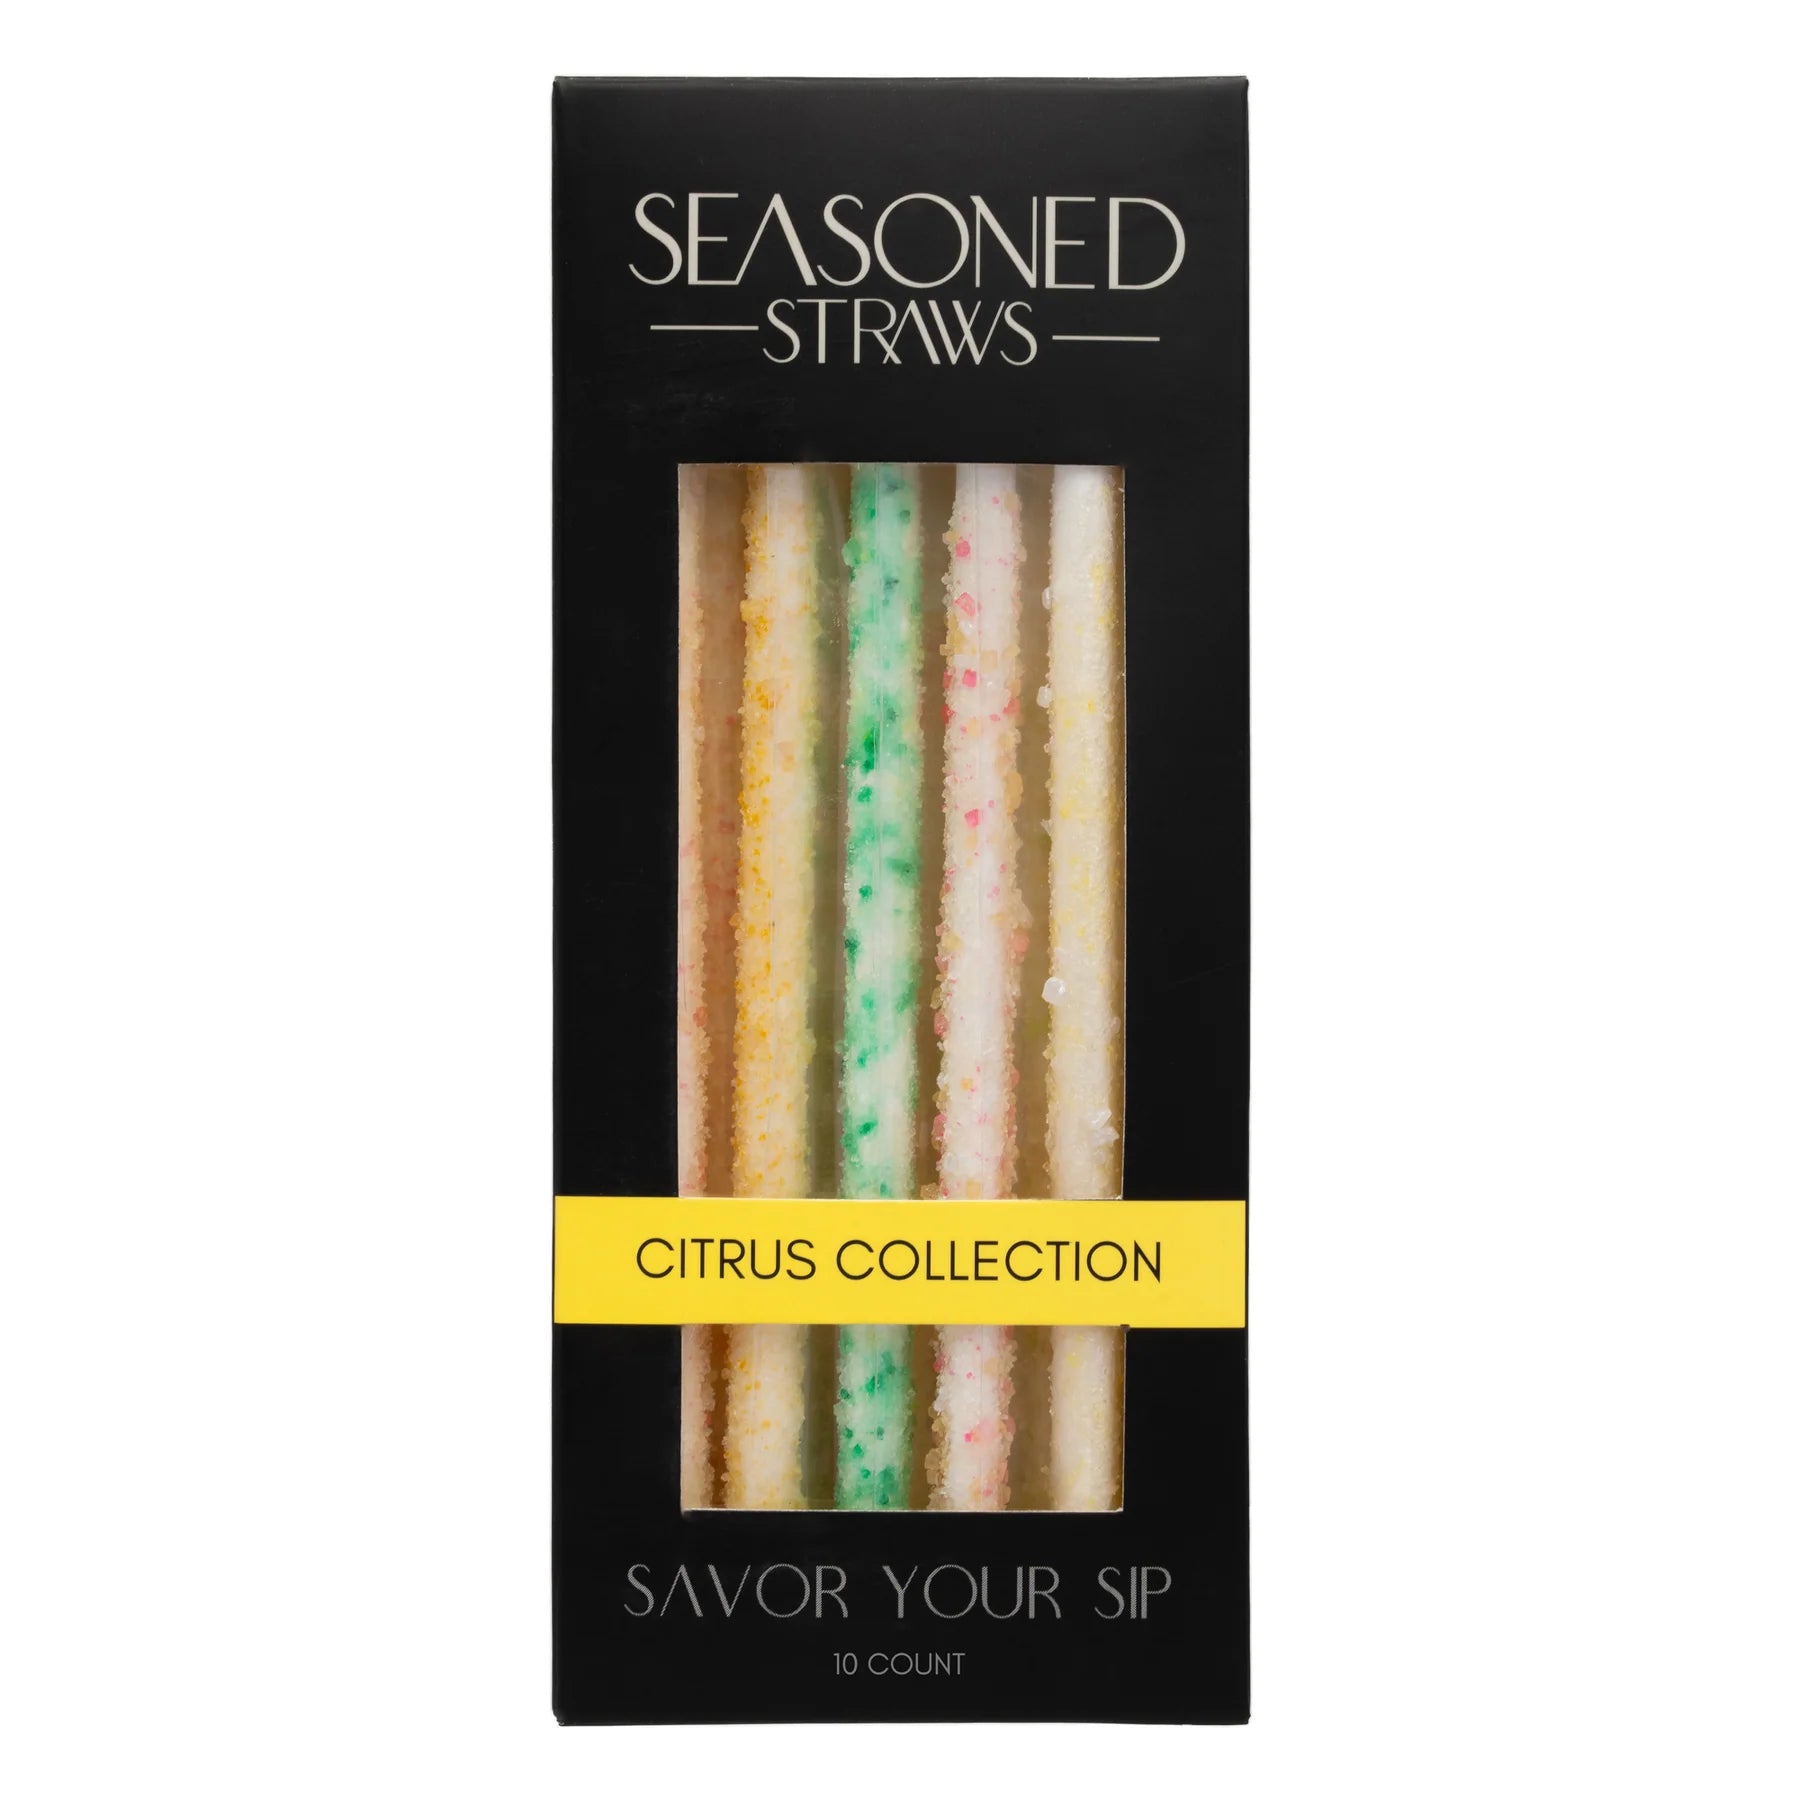 Seasoned Straws Collections